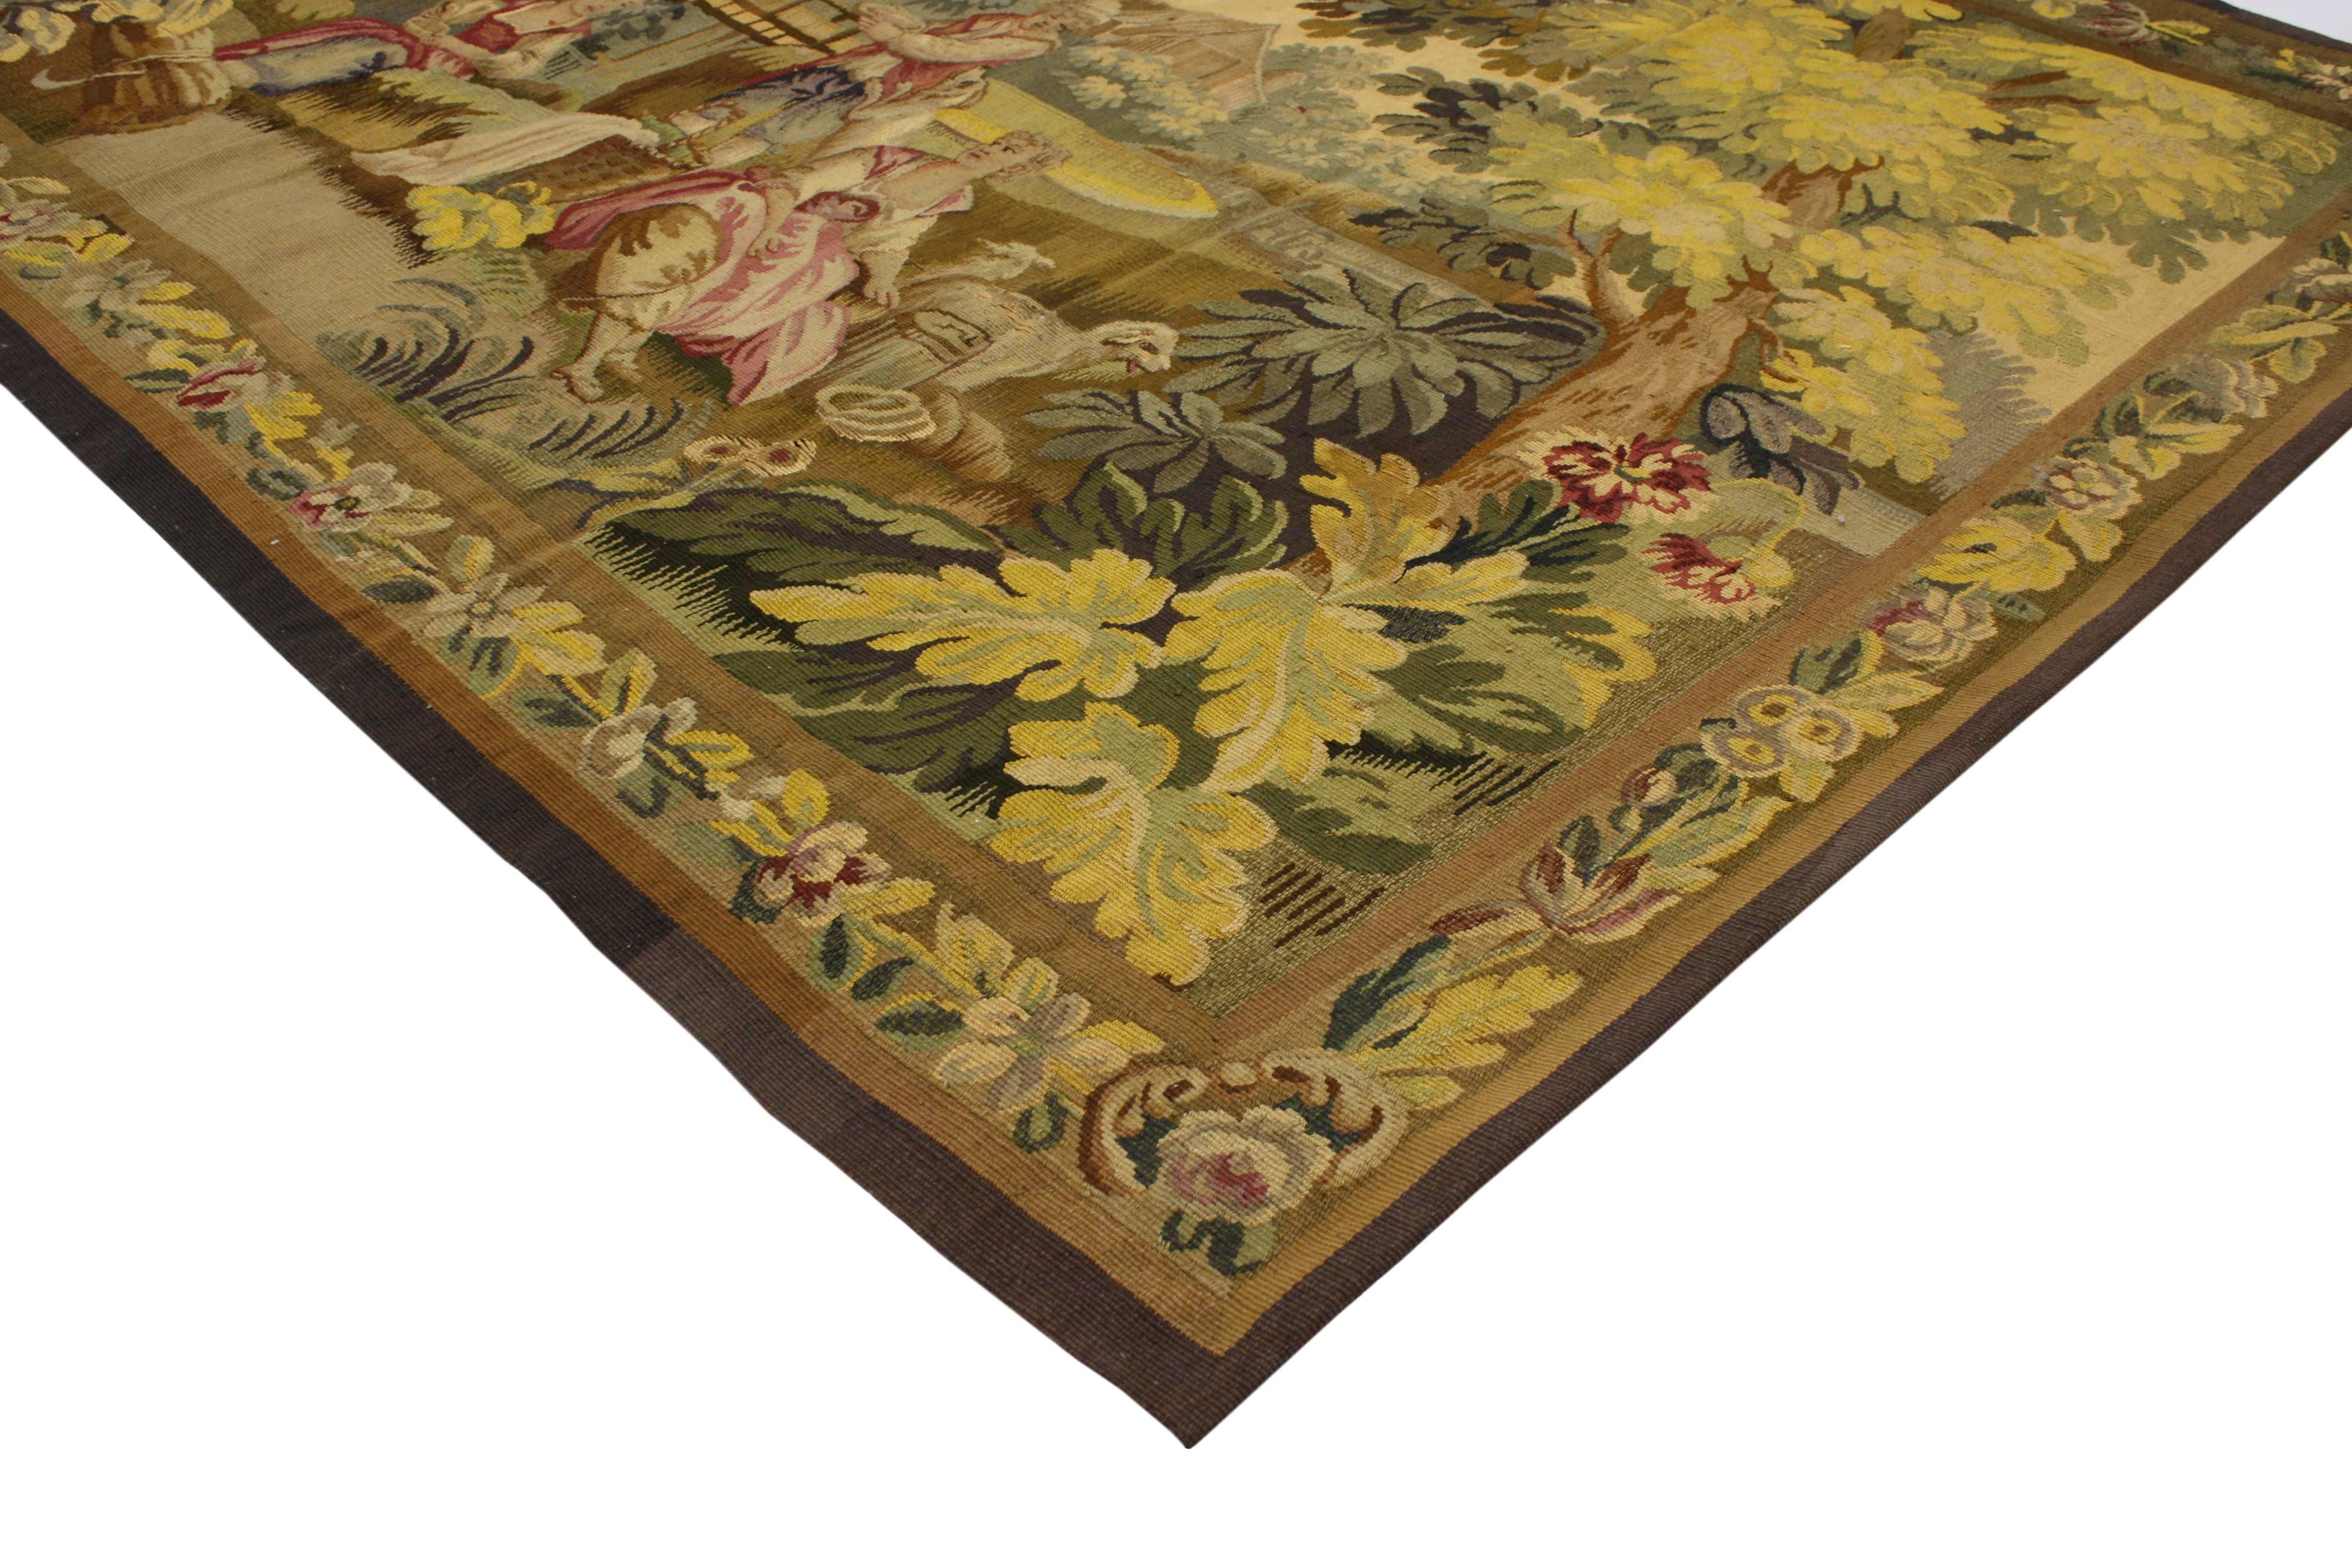 73139 Antique French Rococo Tapestry Inspired by Francois Boucher, Romance in the Country, Pastoral Tapestry Wall Hanging. Drawing inspiration from Louis XV style and Francois Boucher's Romance in the Country, this handwoven wool and silk antique